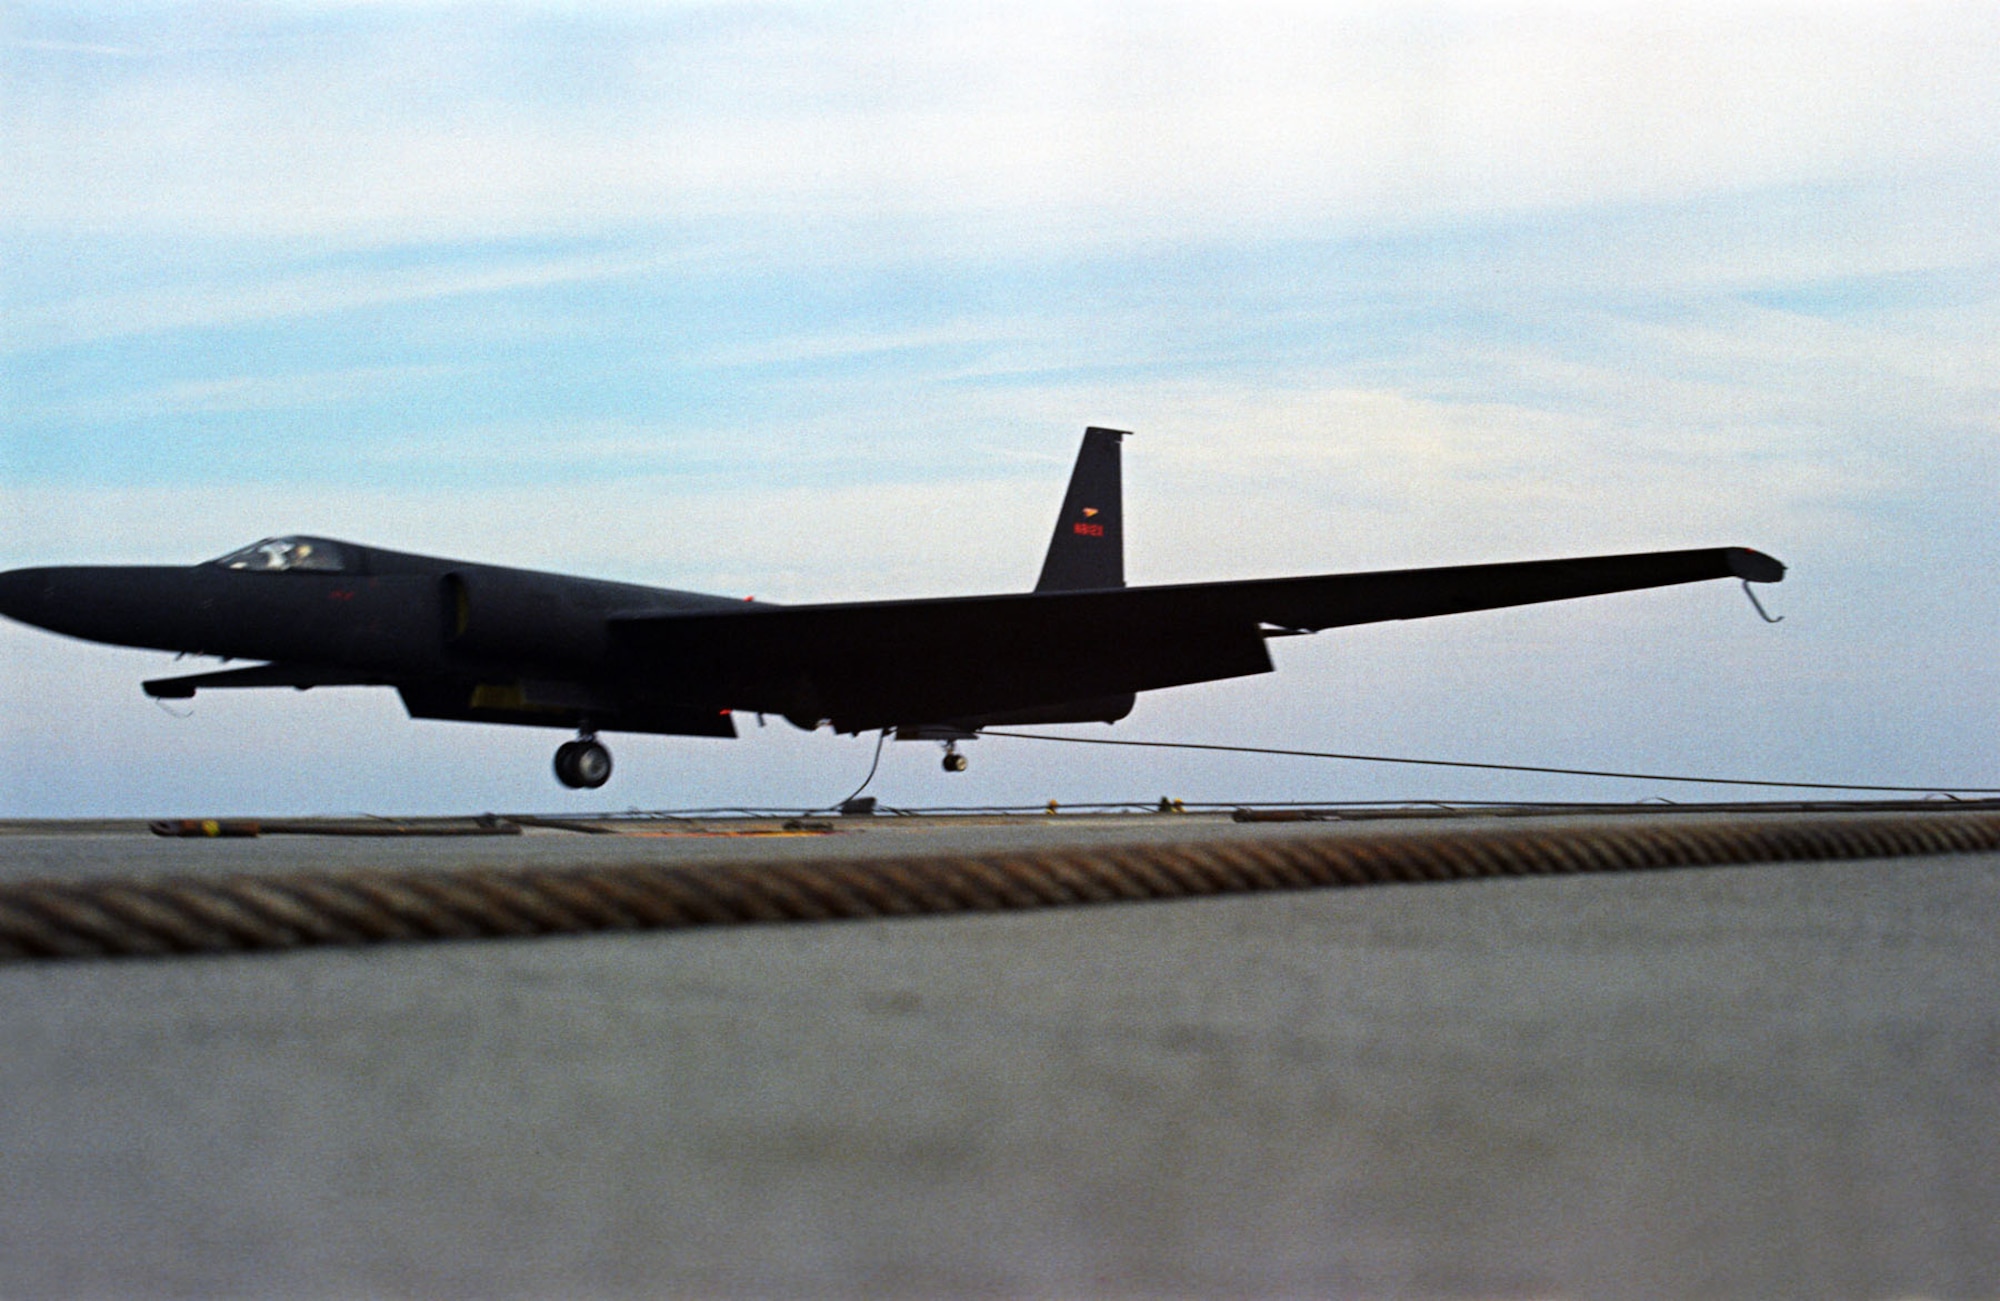 The U-2 was studied for use aboard aircraft carriers to extend its range, but this idea was not used operationally. Here, a U-2 lands on a carrier using an arresting hook. (U.S. Air Force photo)